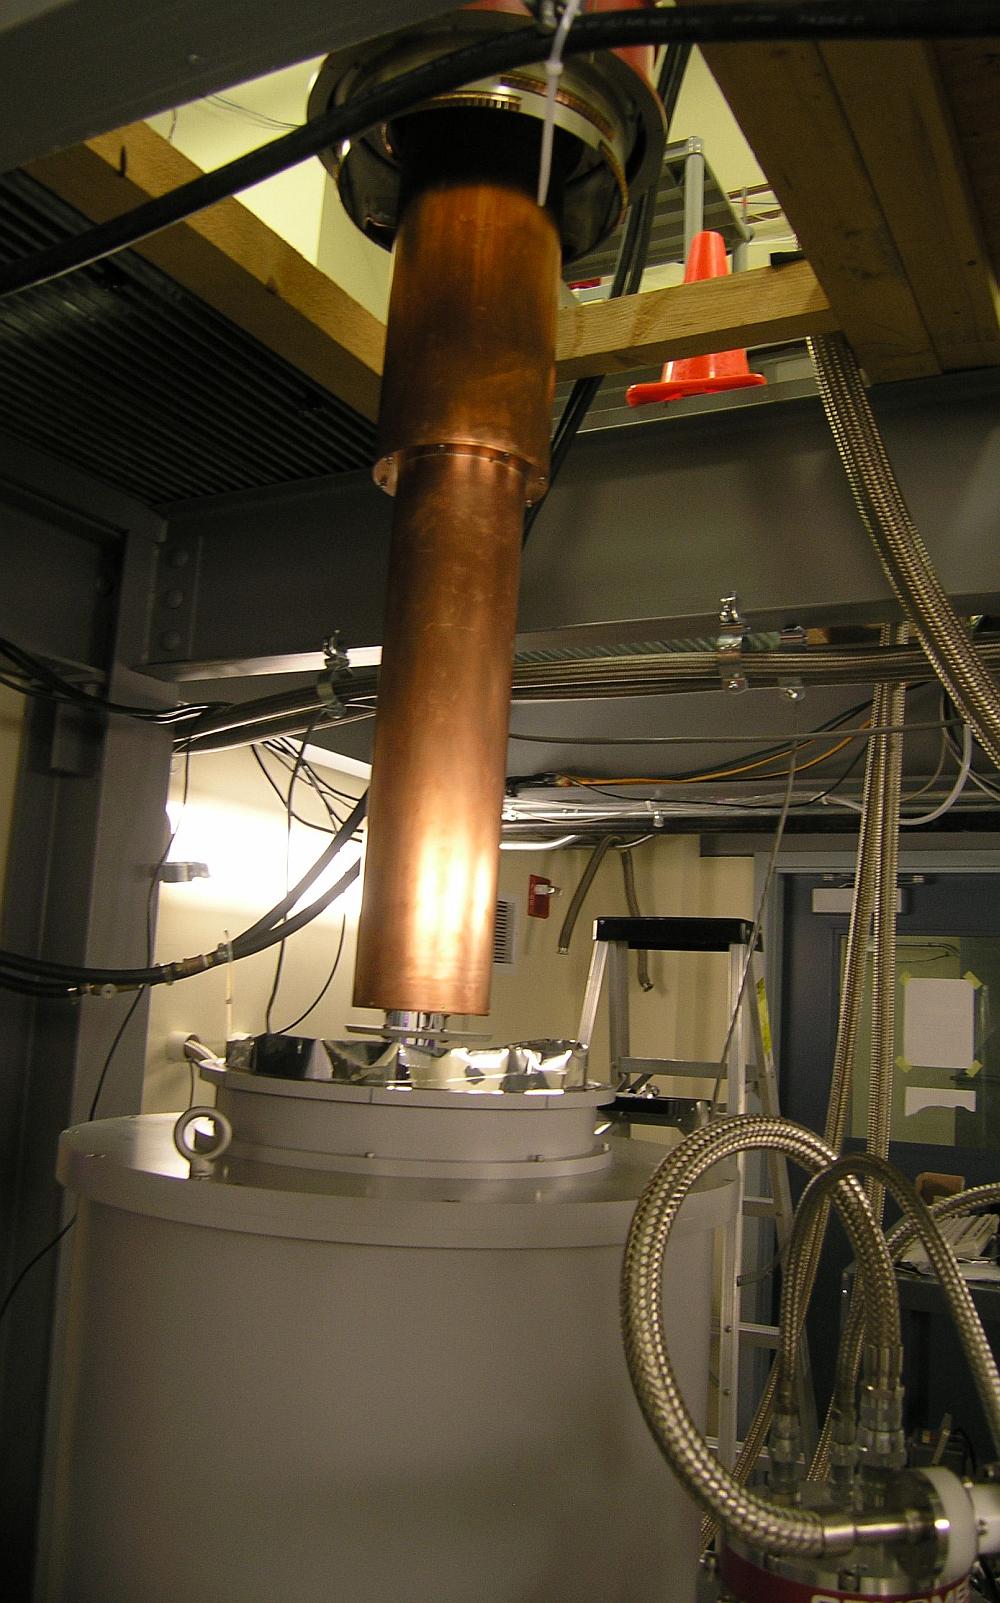 The cavity assembly, encased in a copper thermal shield, hangs from the dilution refrigerator, which has been hoisted into the air and positioned above the magnet bore for insertion.